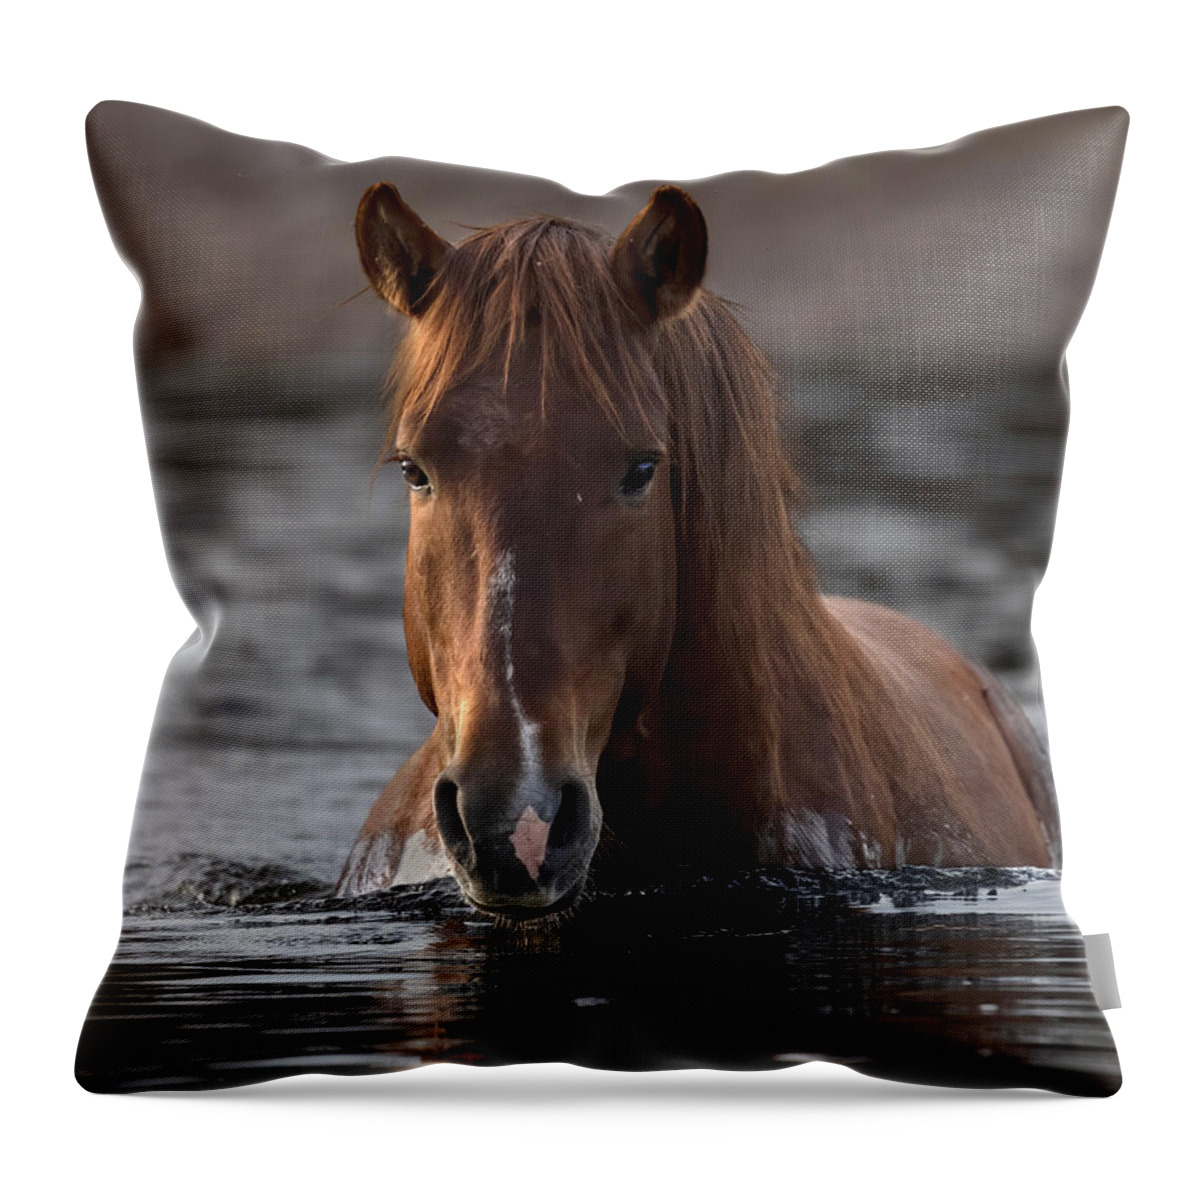 Stallion Throw Pillow featuring the photograph Twilight Crossing. by Paul Martin